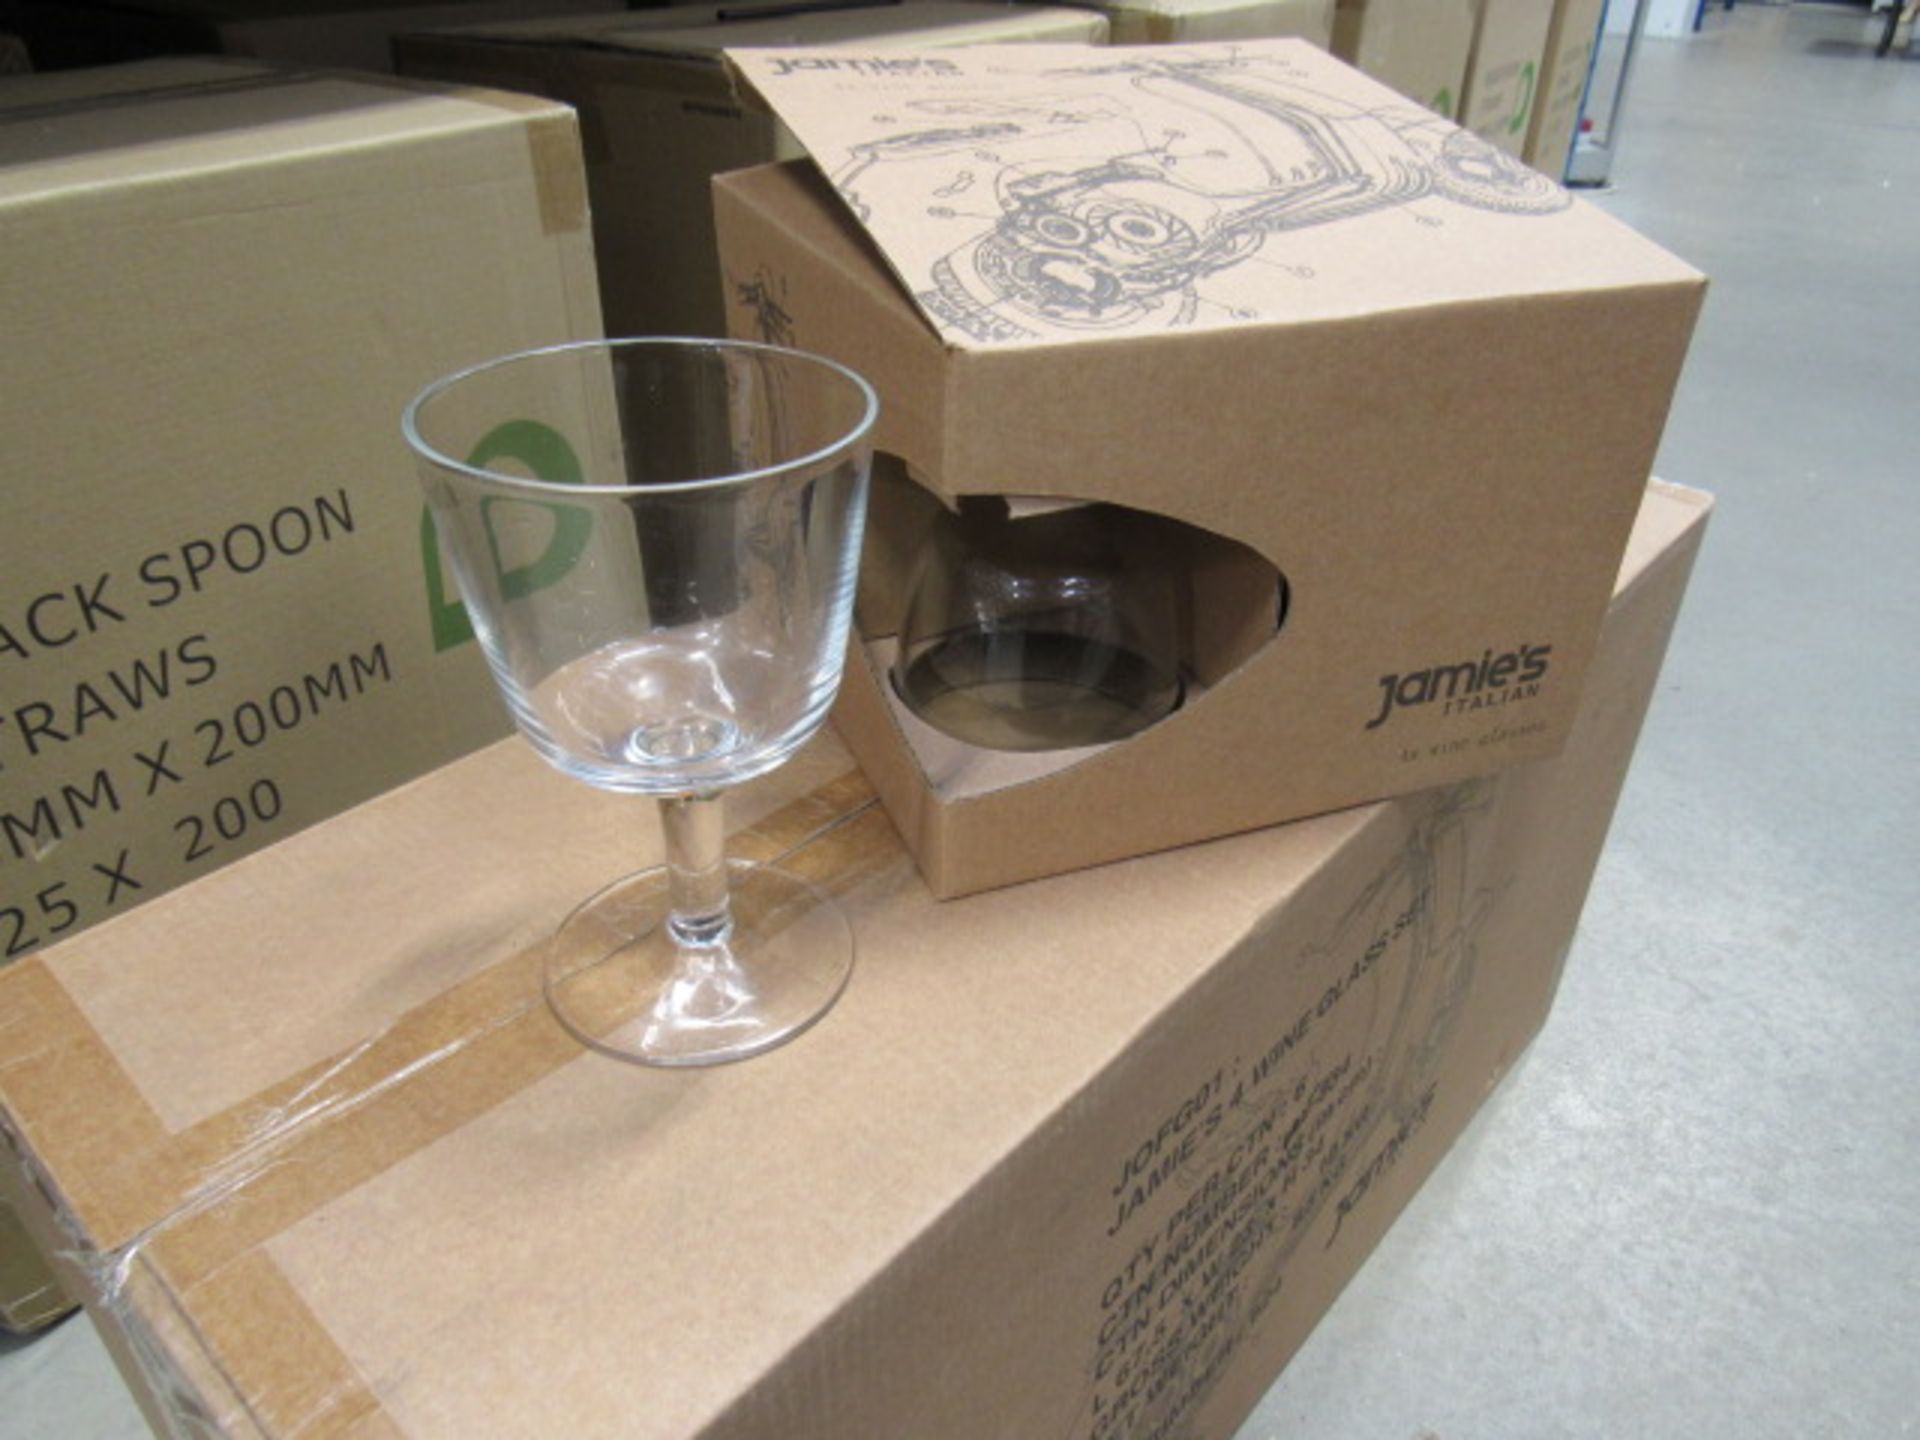 Box containing 6 Jamie Oliver wine glass sets